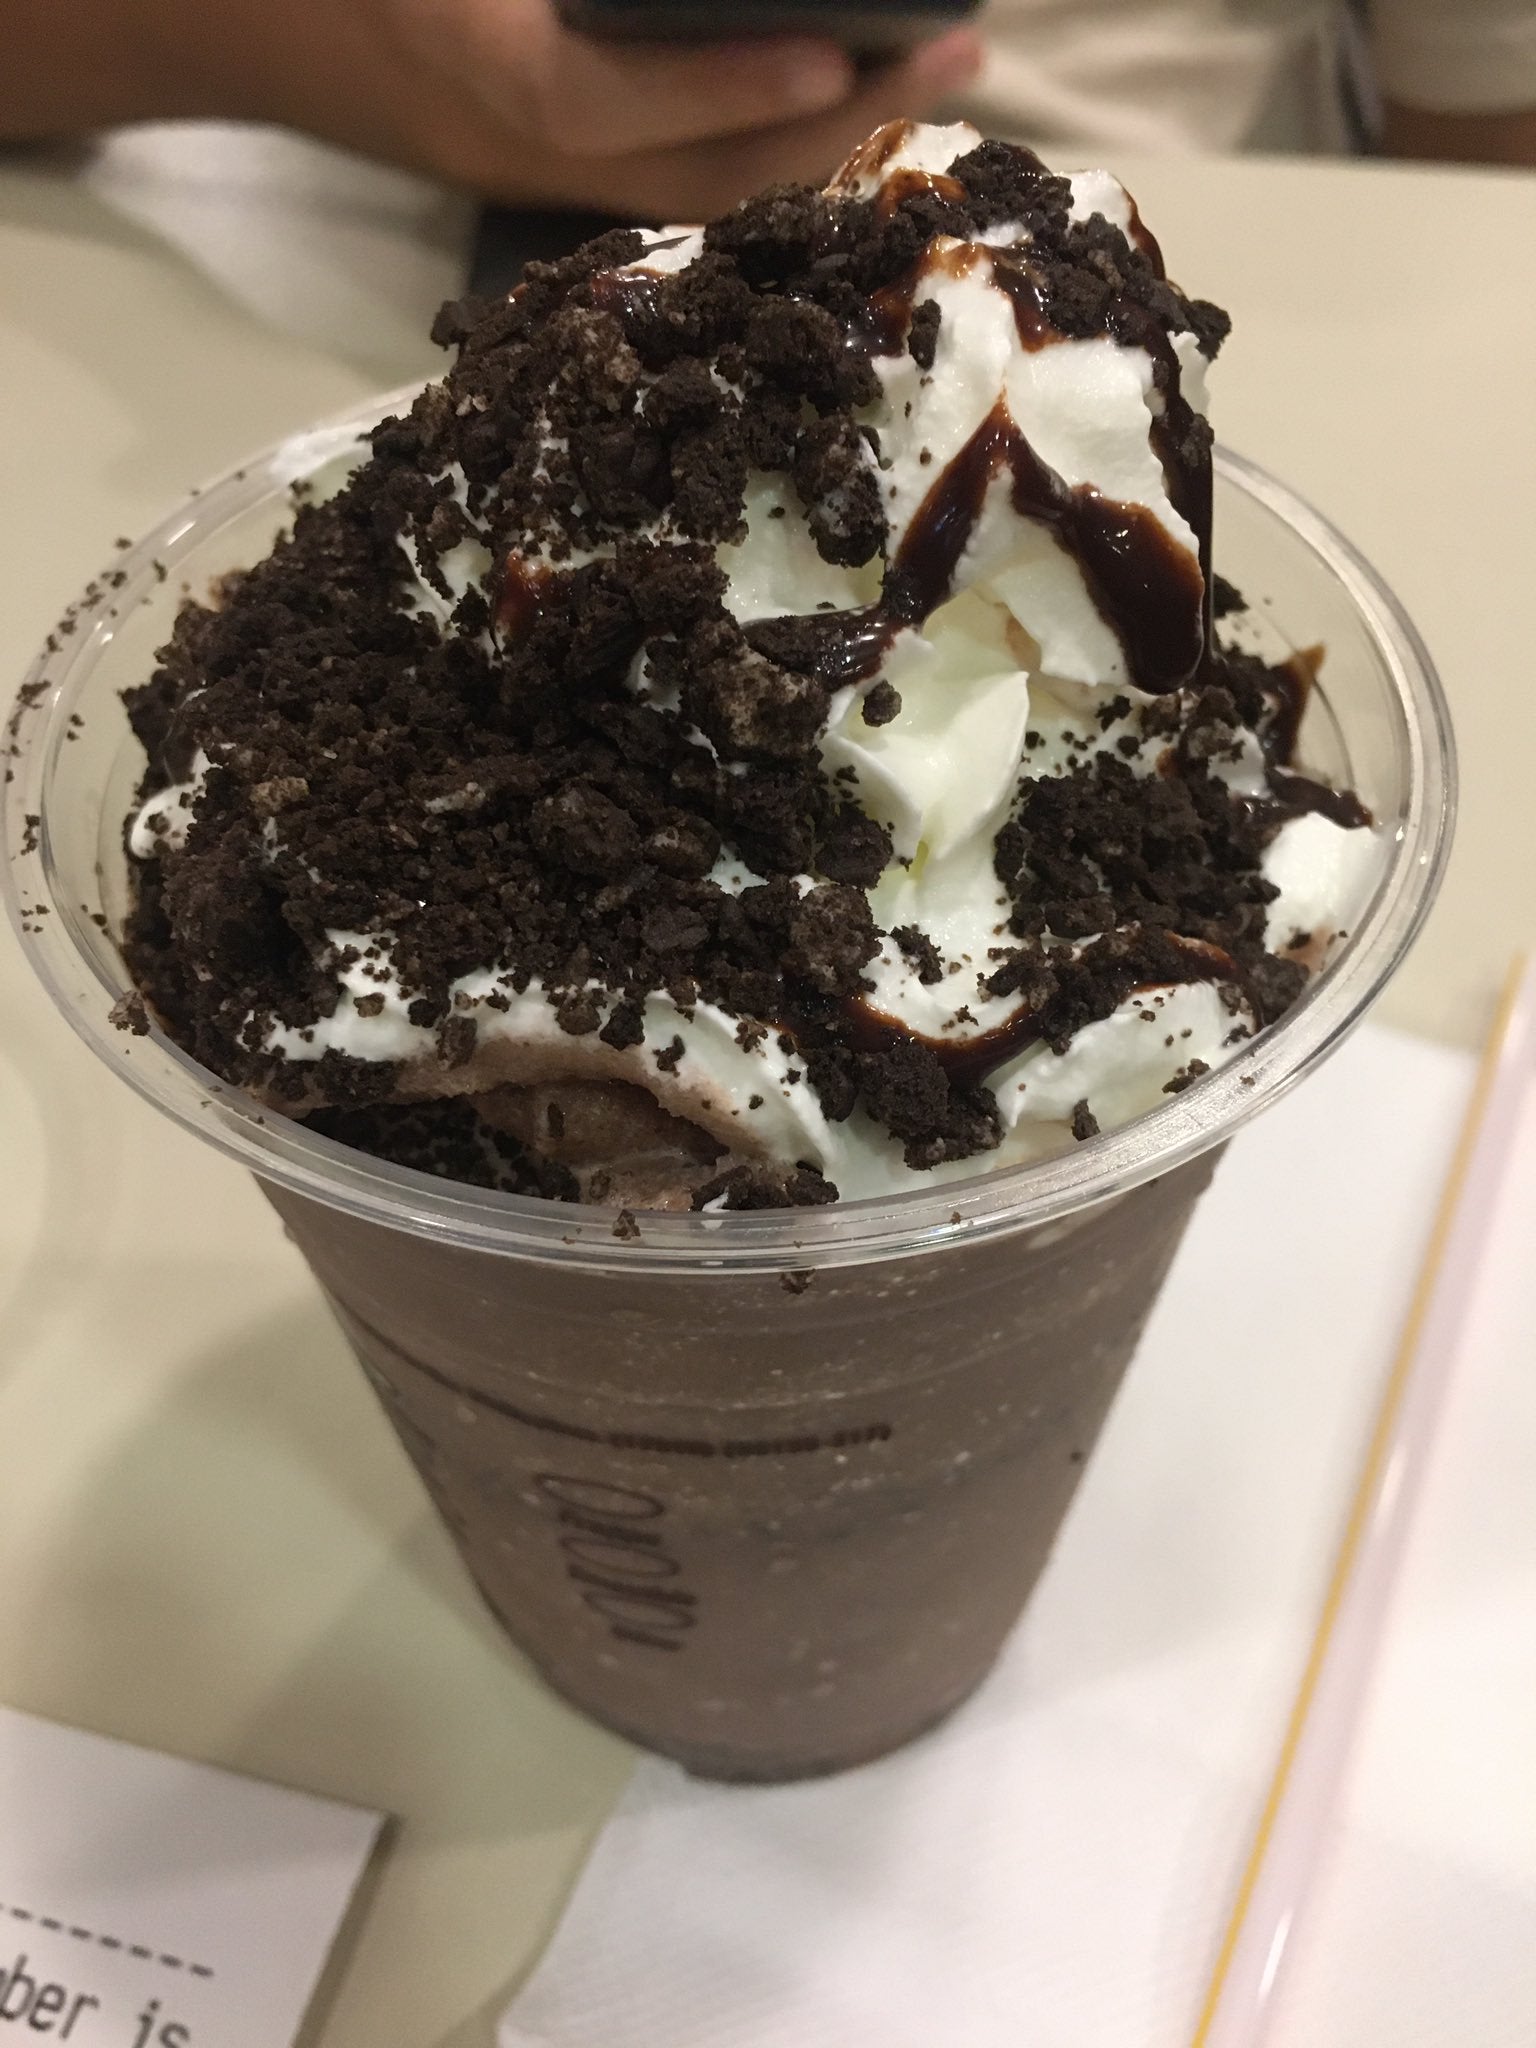 McDonald's M'sia Has Limited Edition Chocolate Drink With Oreo Crumbs & It Looks Super Yummy! - WORLD OF BUZZ 2